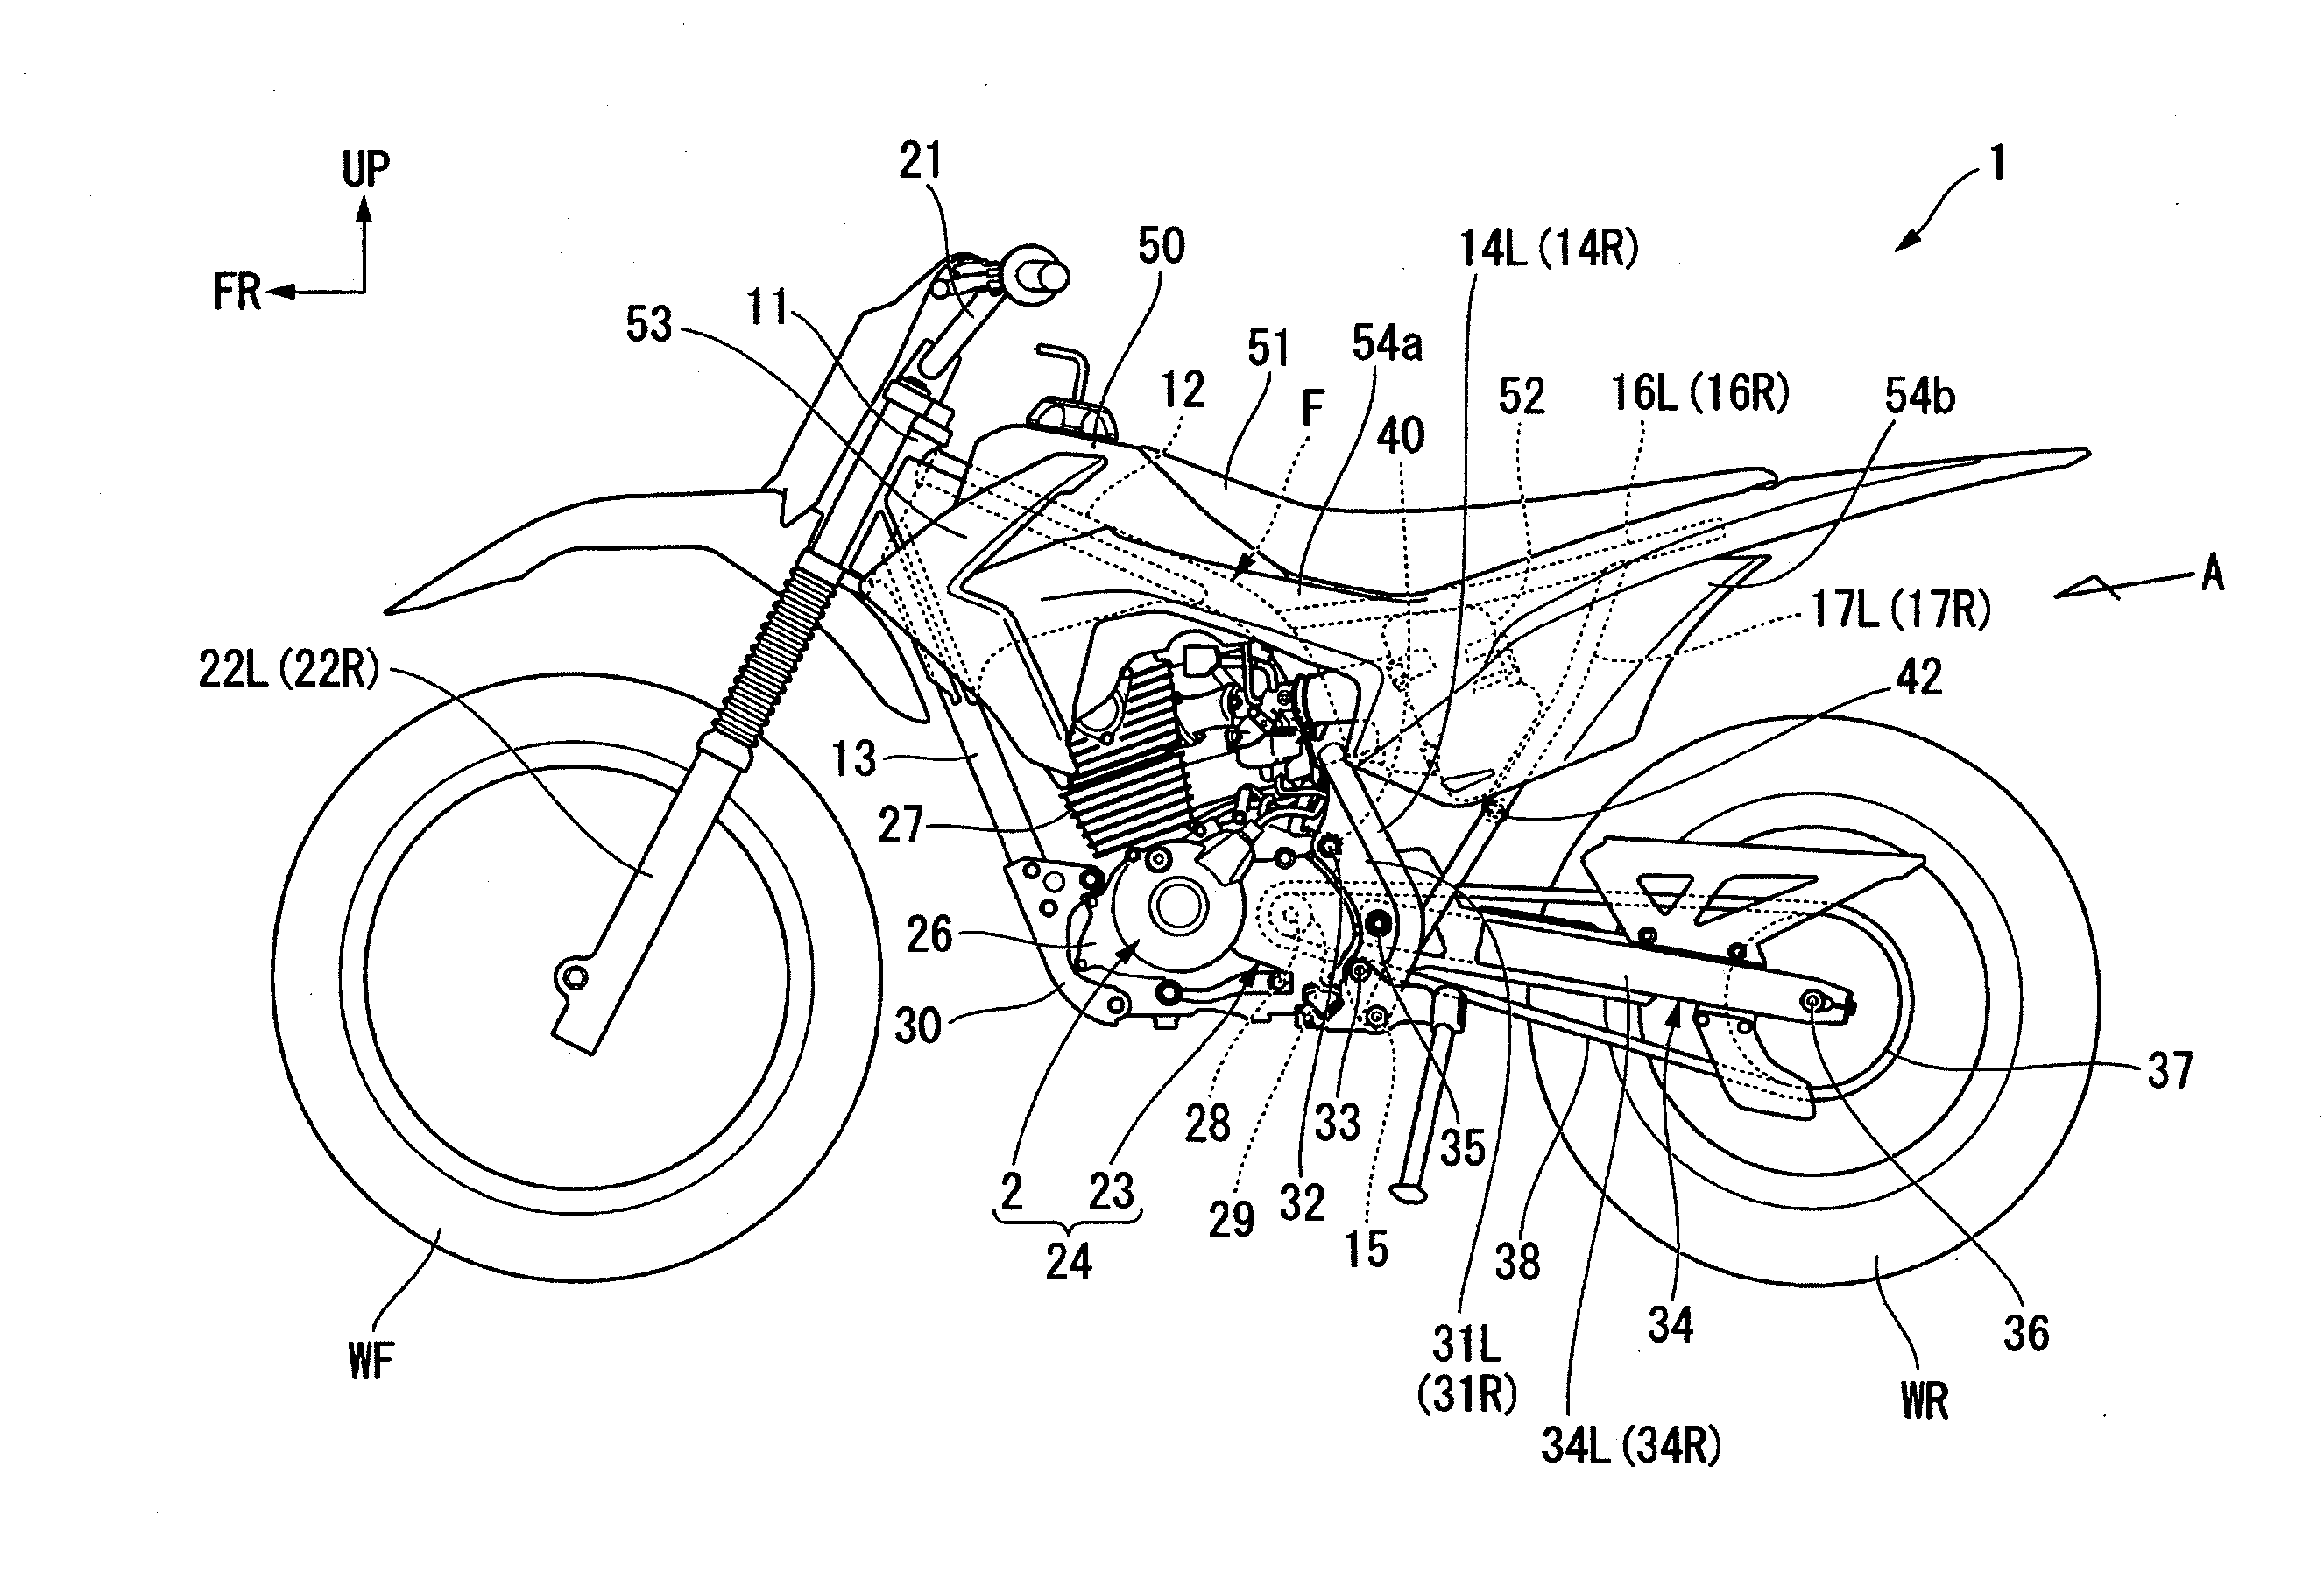 Chain drive for saddle-ride type vehicle